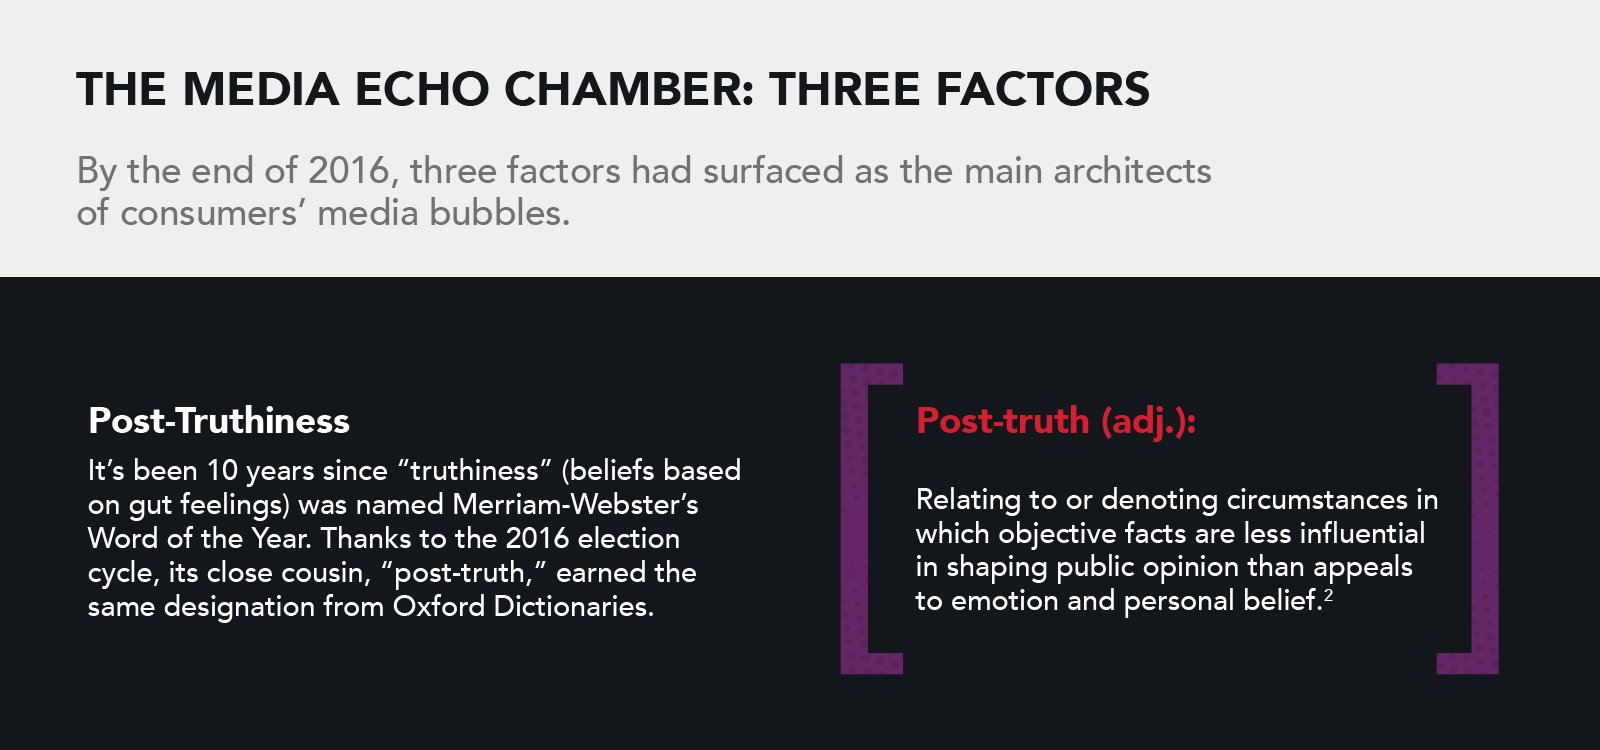 Publicis Experiential Digital Brands and Live Experiences - Media echo chamber's post-truthiness